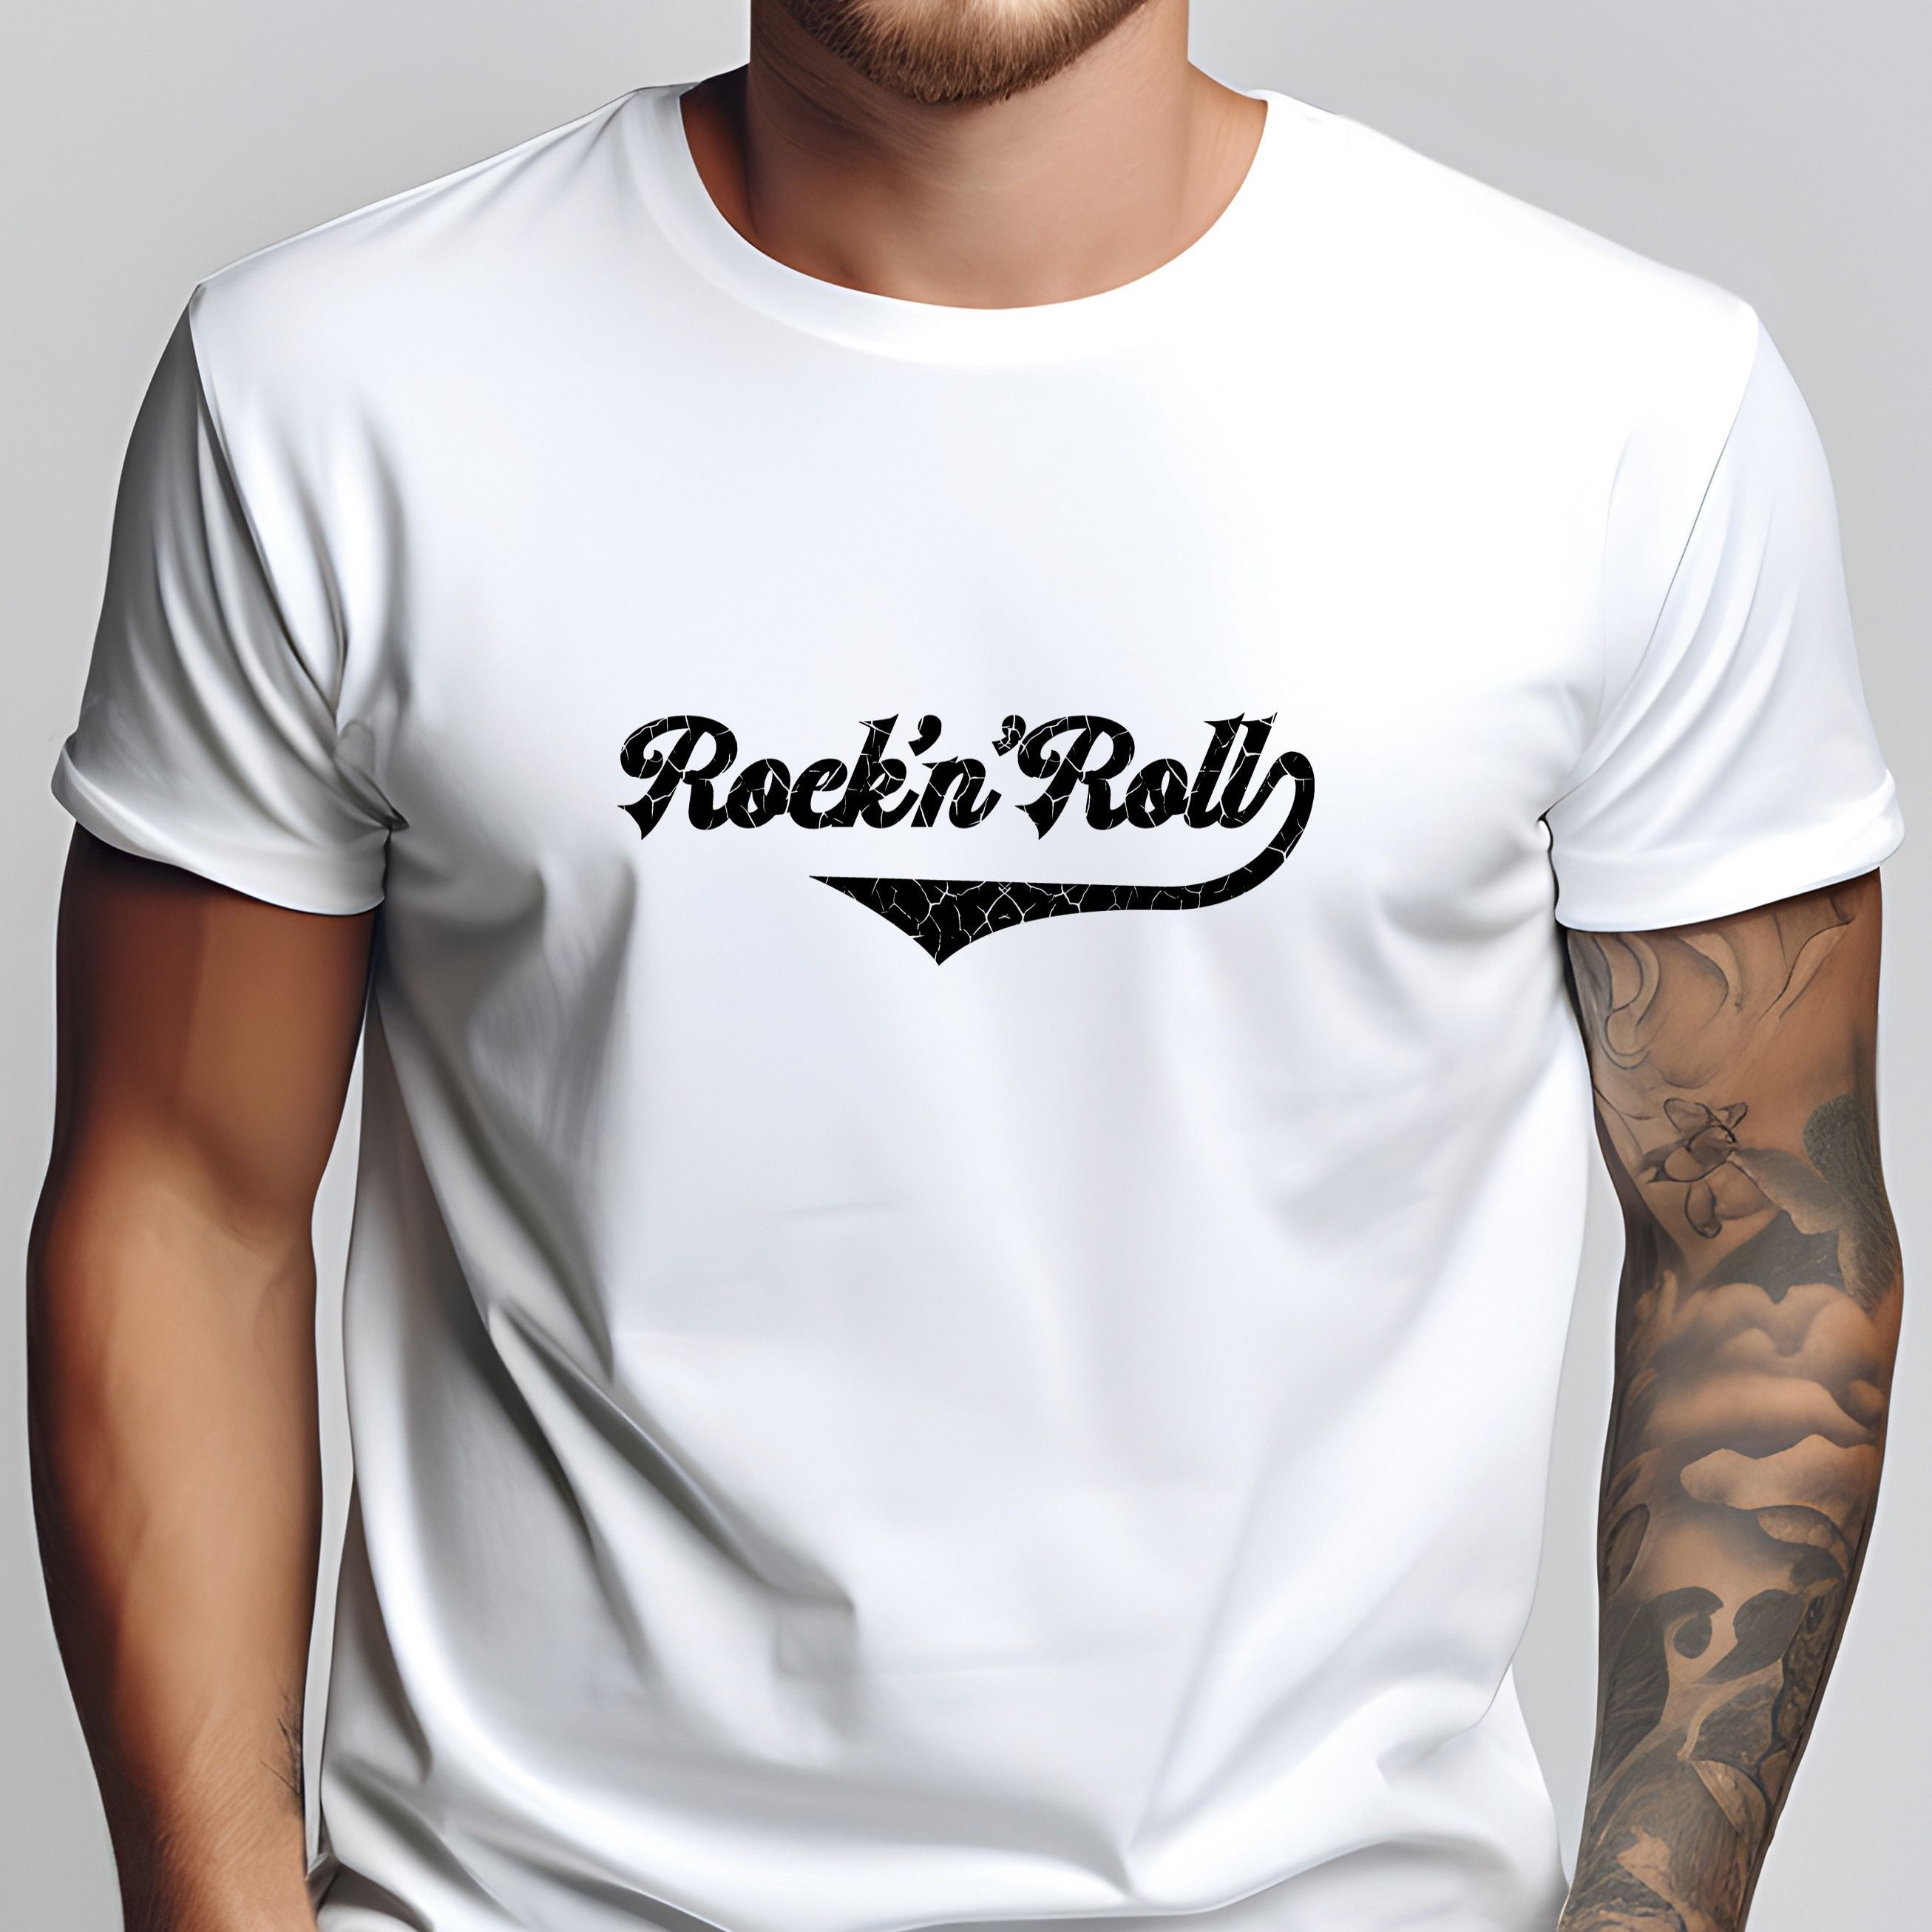 

Rock And Roll Print Tee Shirt, Tees For Men, Casual Short Sleeve T-shirt For Summer